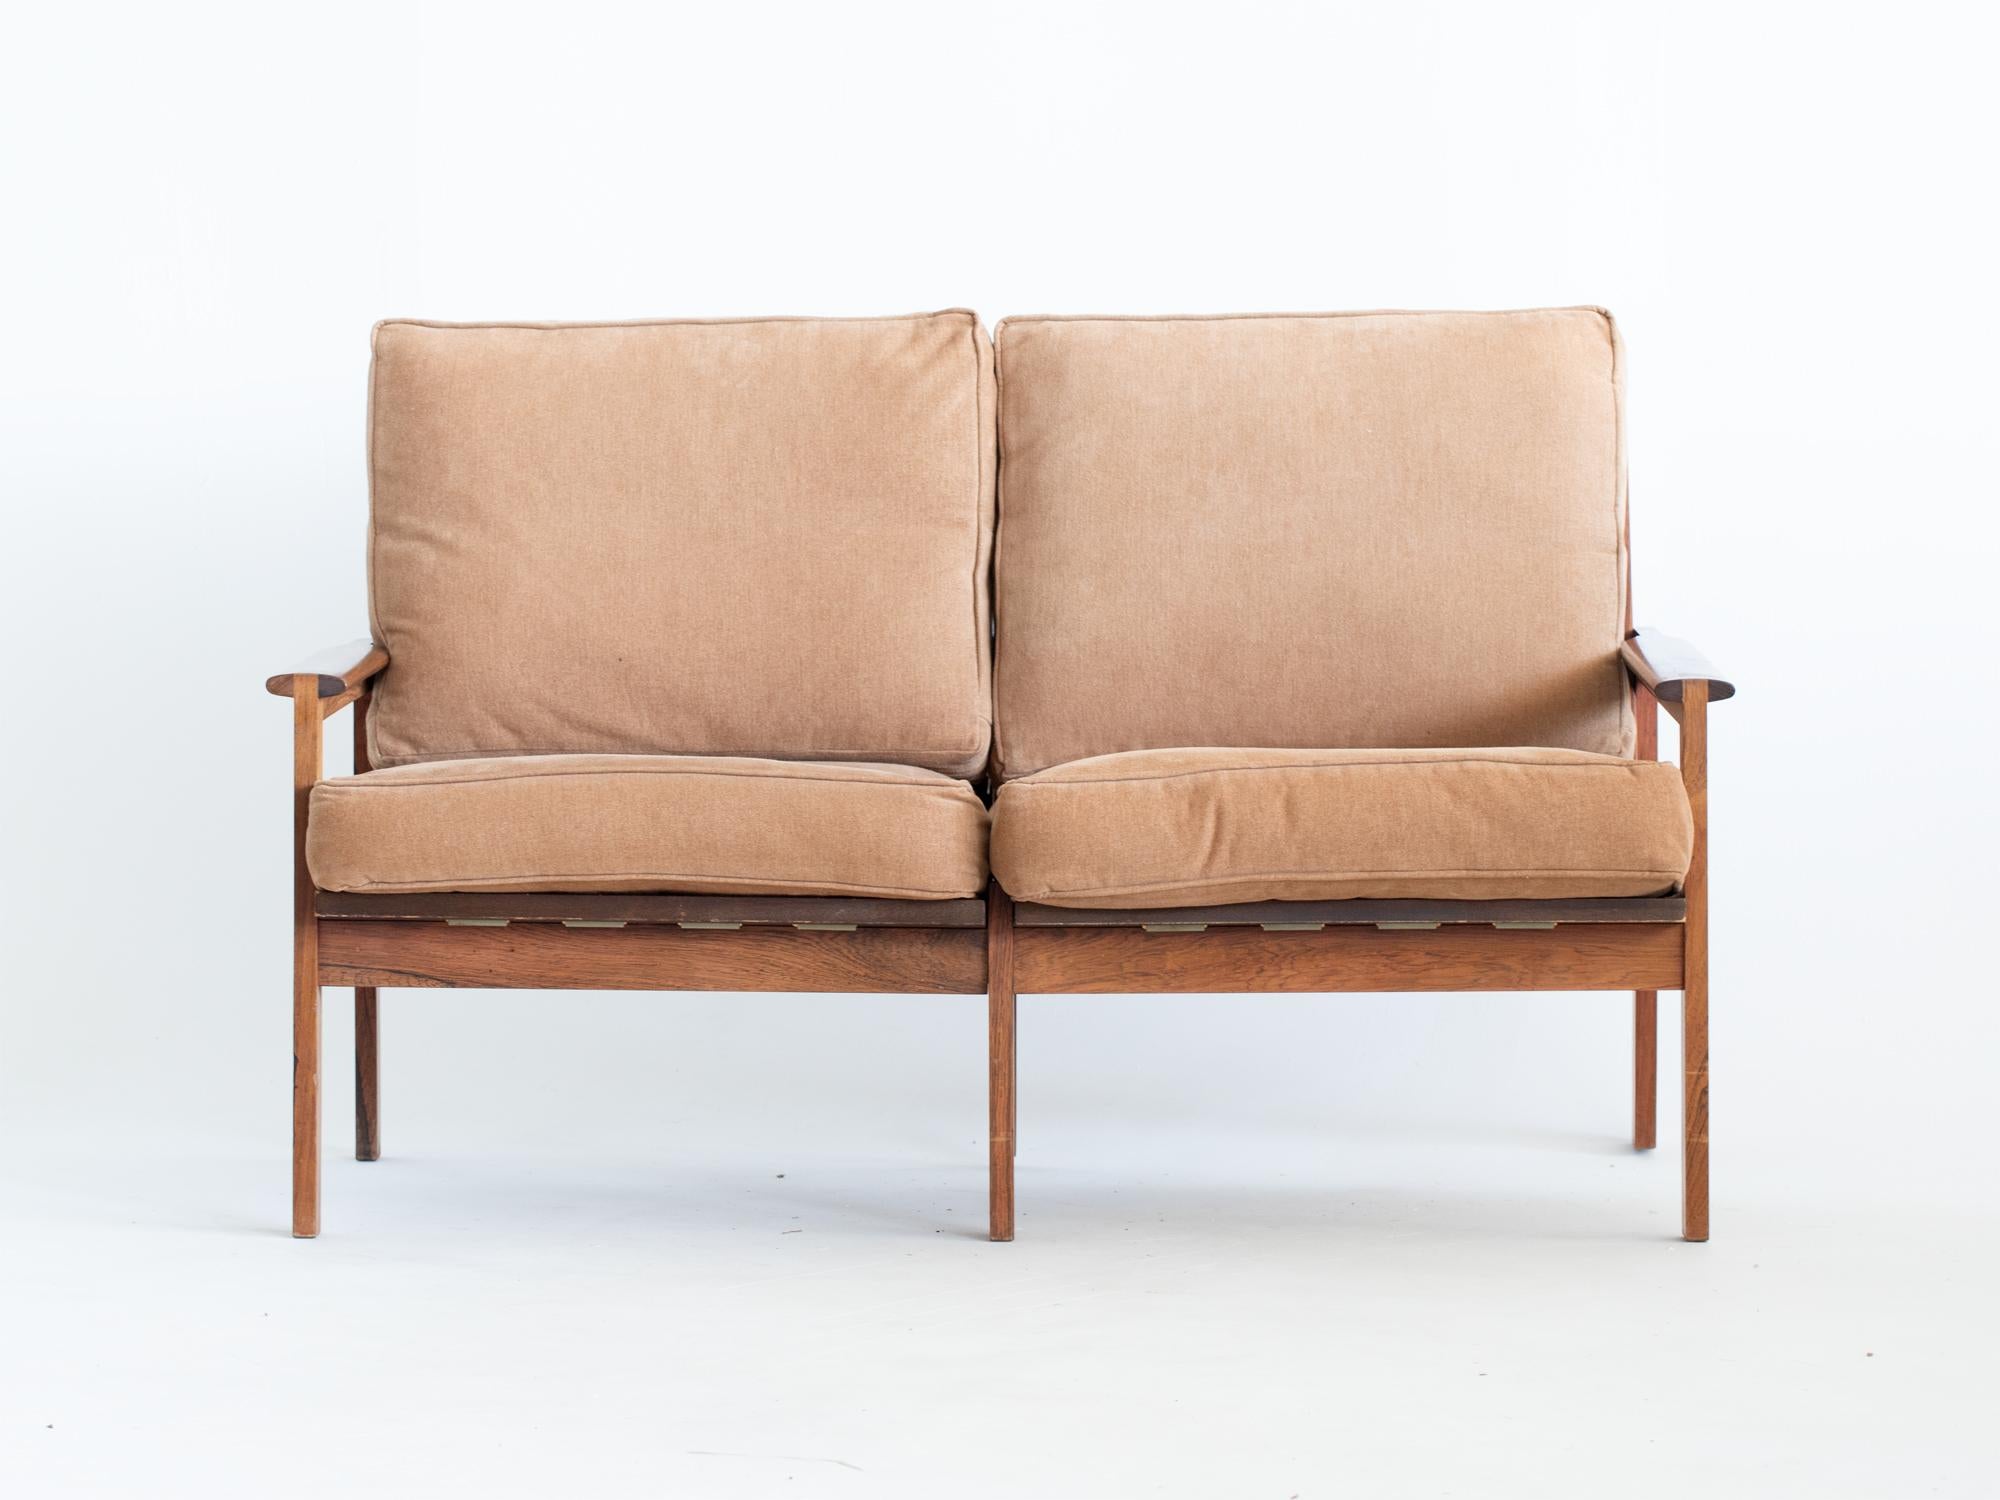 A mid-century upholstered teak Capella sofa by lllum Wikkelso for Niels Eilersen. Danish, c. 1960s.

In good solid order with light cosmetic wear to the frame. The cushions’ later upholstery is clean and servicable as is.

80 x 129 x 76 cm (31.5 x